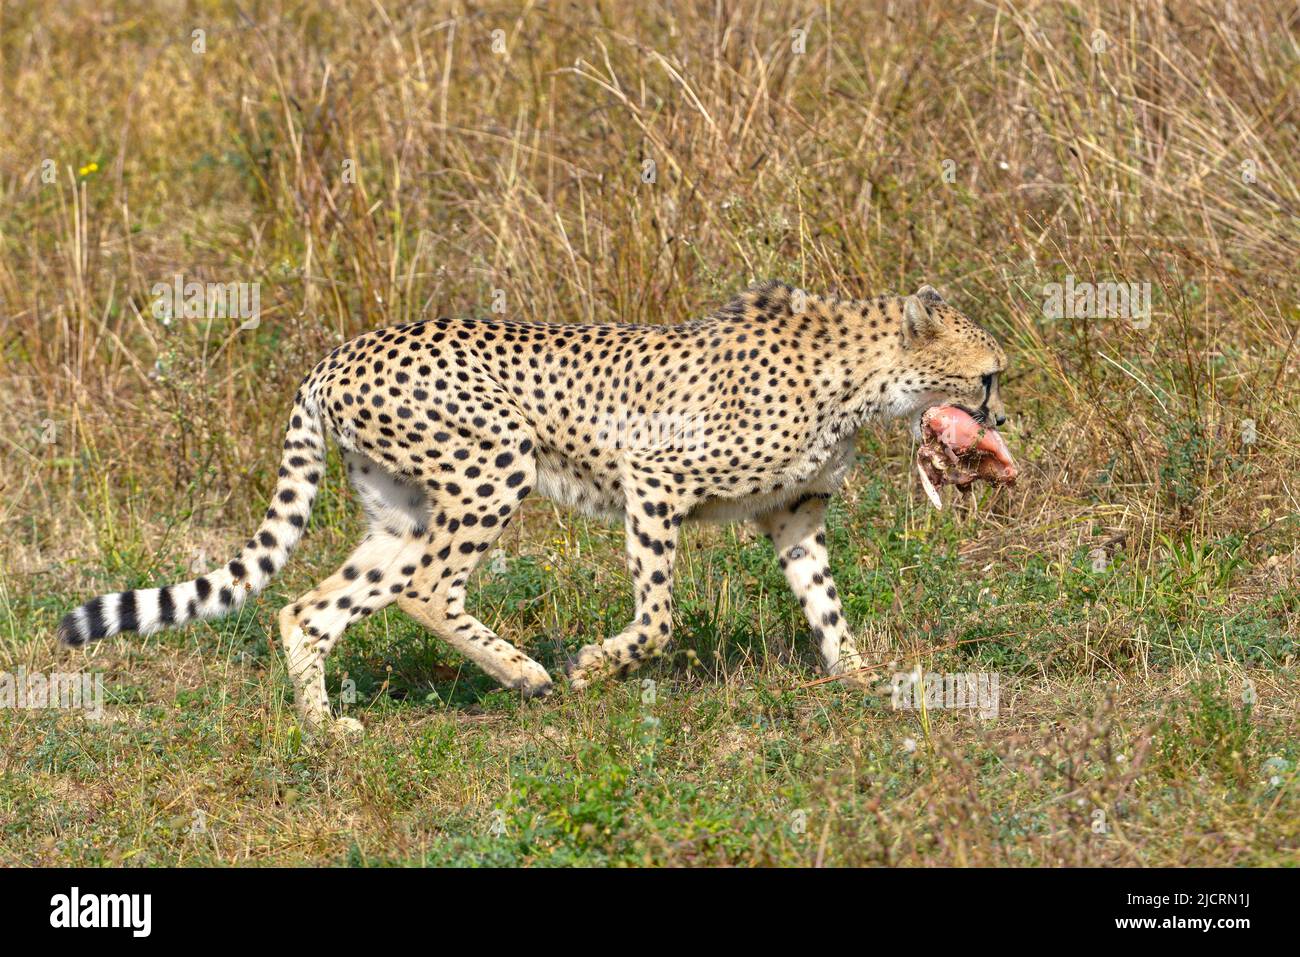 Profile African Cheetah (Acinonyx jubatus) walking on grass with meat in his mouth Stock Photo